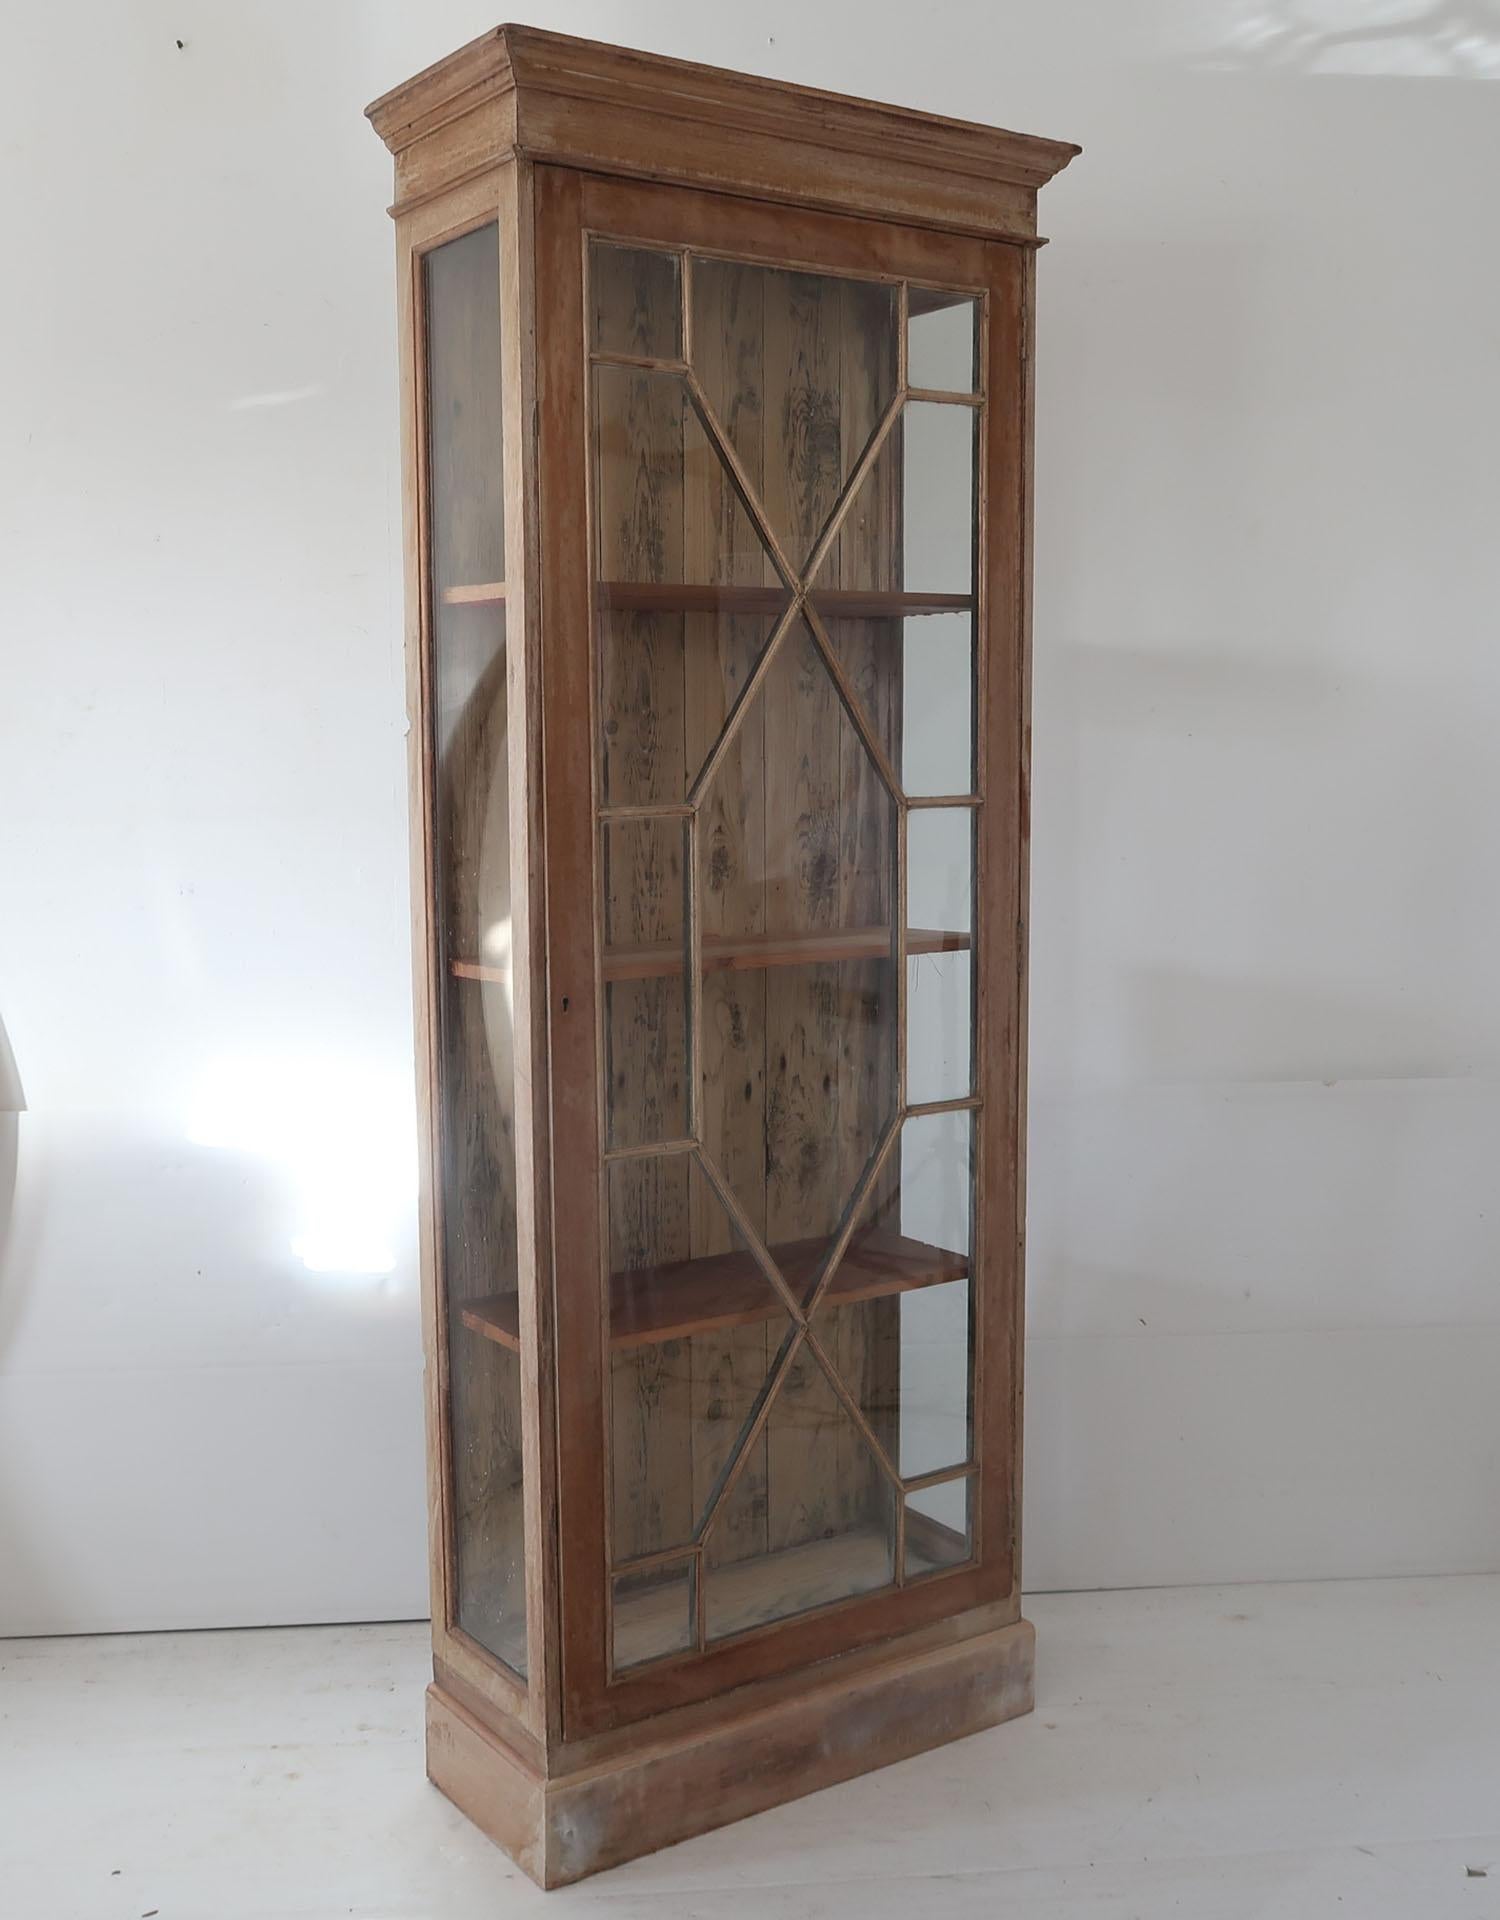 Fabulous small bleached mahogany and pine cabinet

I particularly like the simplicity of this piece and the original bubbly glass in the door and sides.

The measurement given is the cornice size.

It has a key.